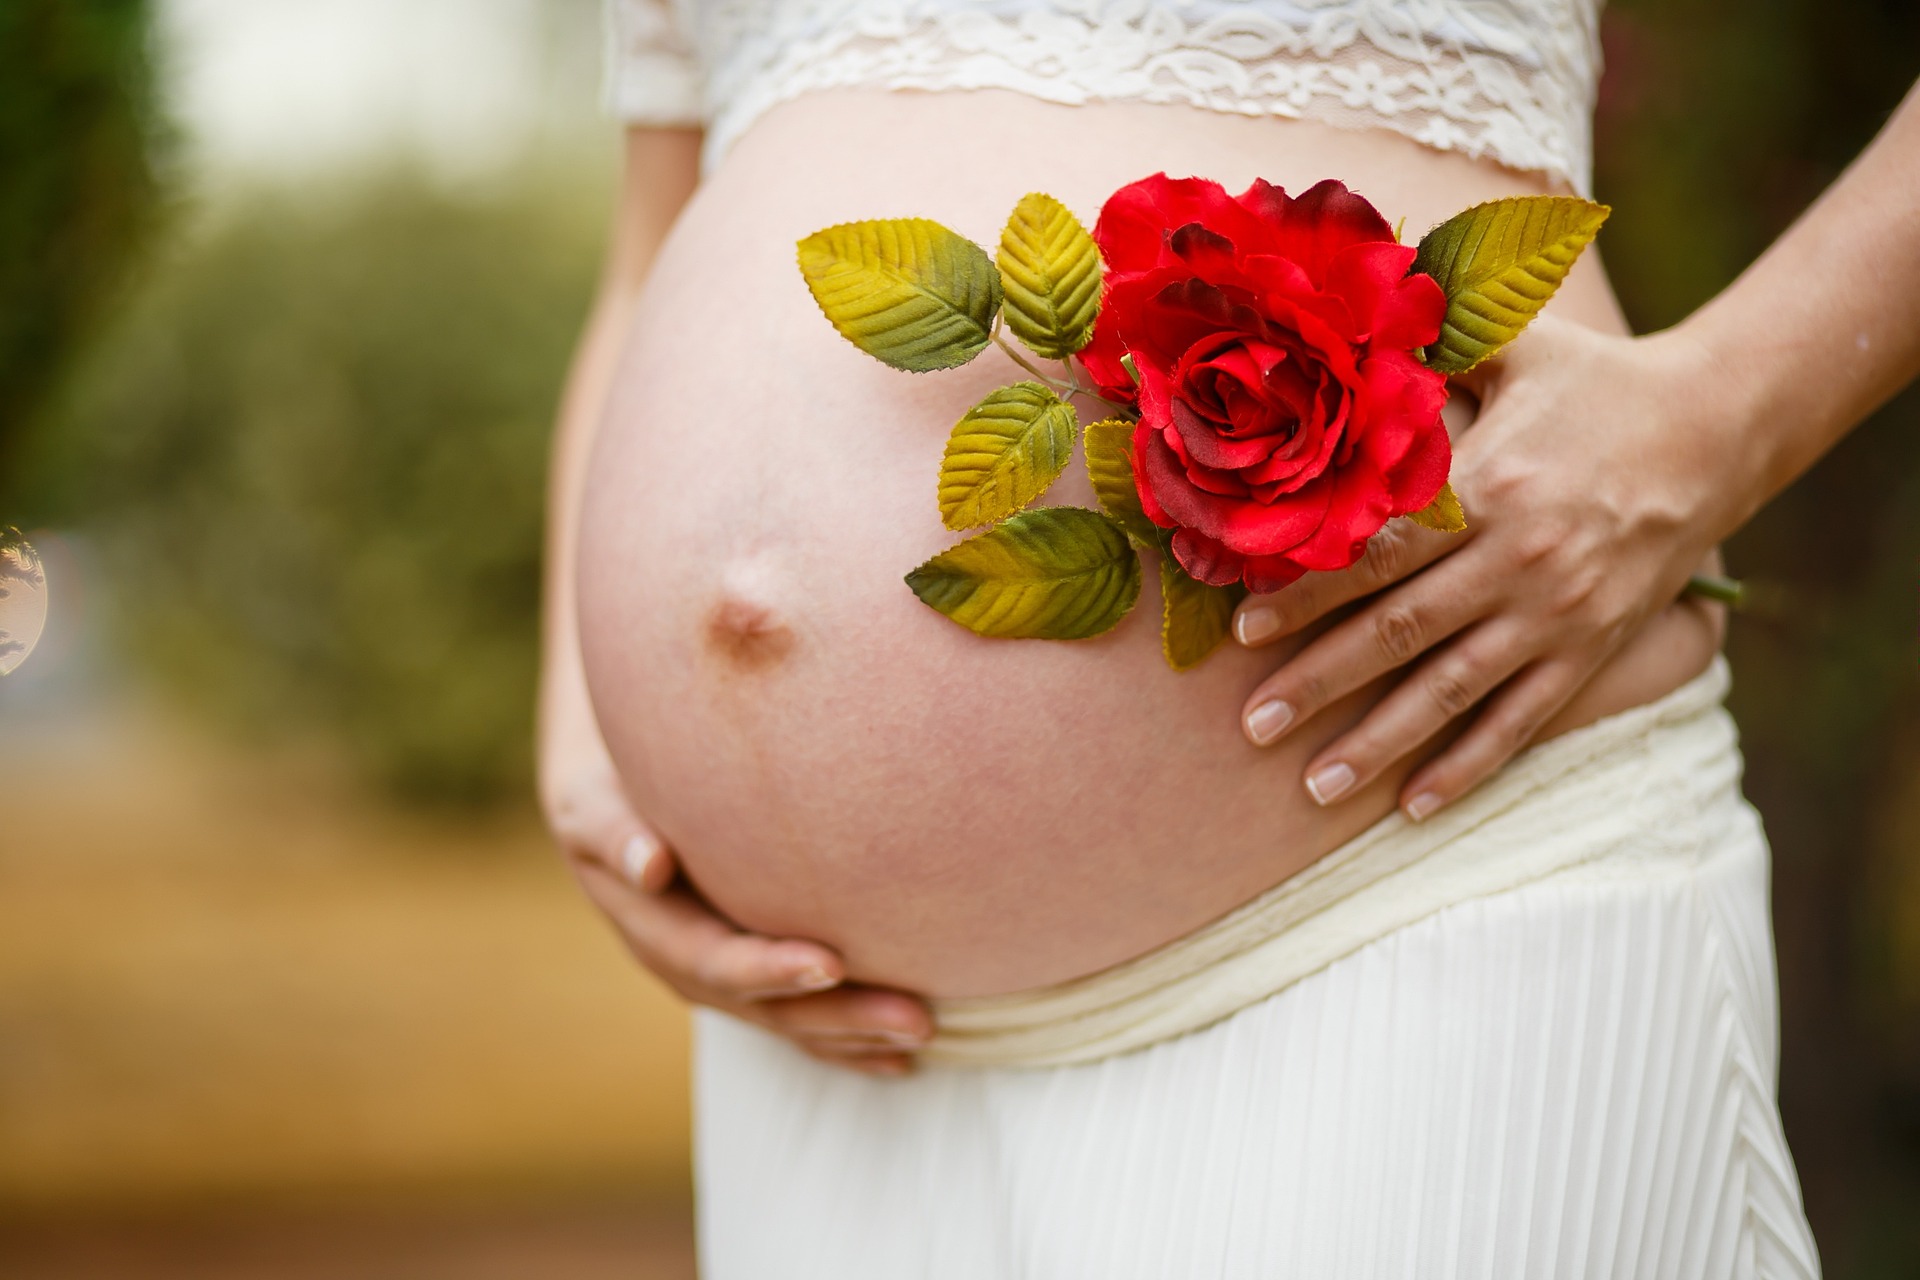 A pregnant woman holding a red rose on her belly